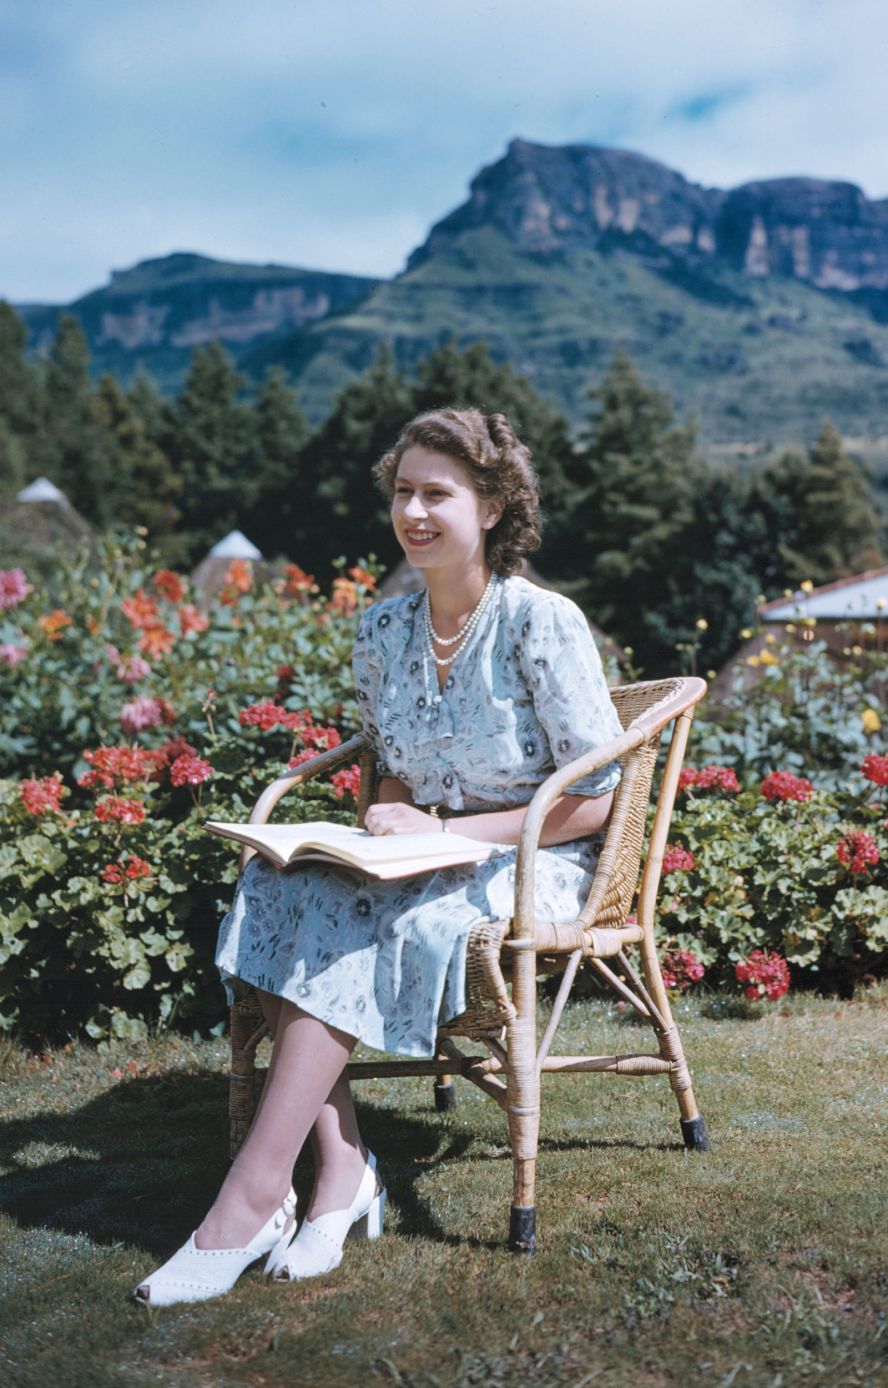 With the Drakensberg Mountains behind her, Princess Elizabeth sits in South Africa's Natal National Park on April 21, 1947. It was her 21st birthday.